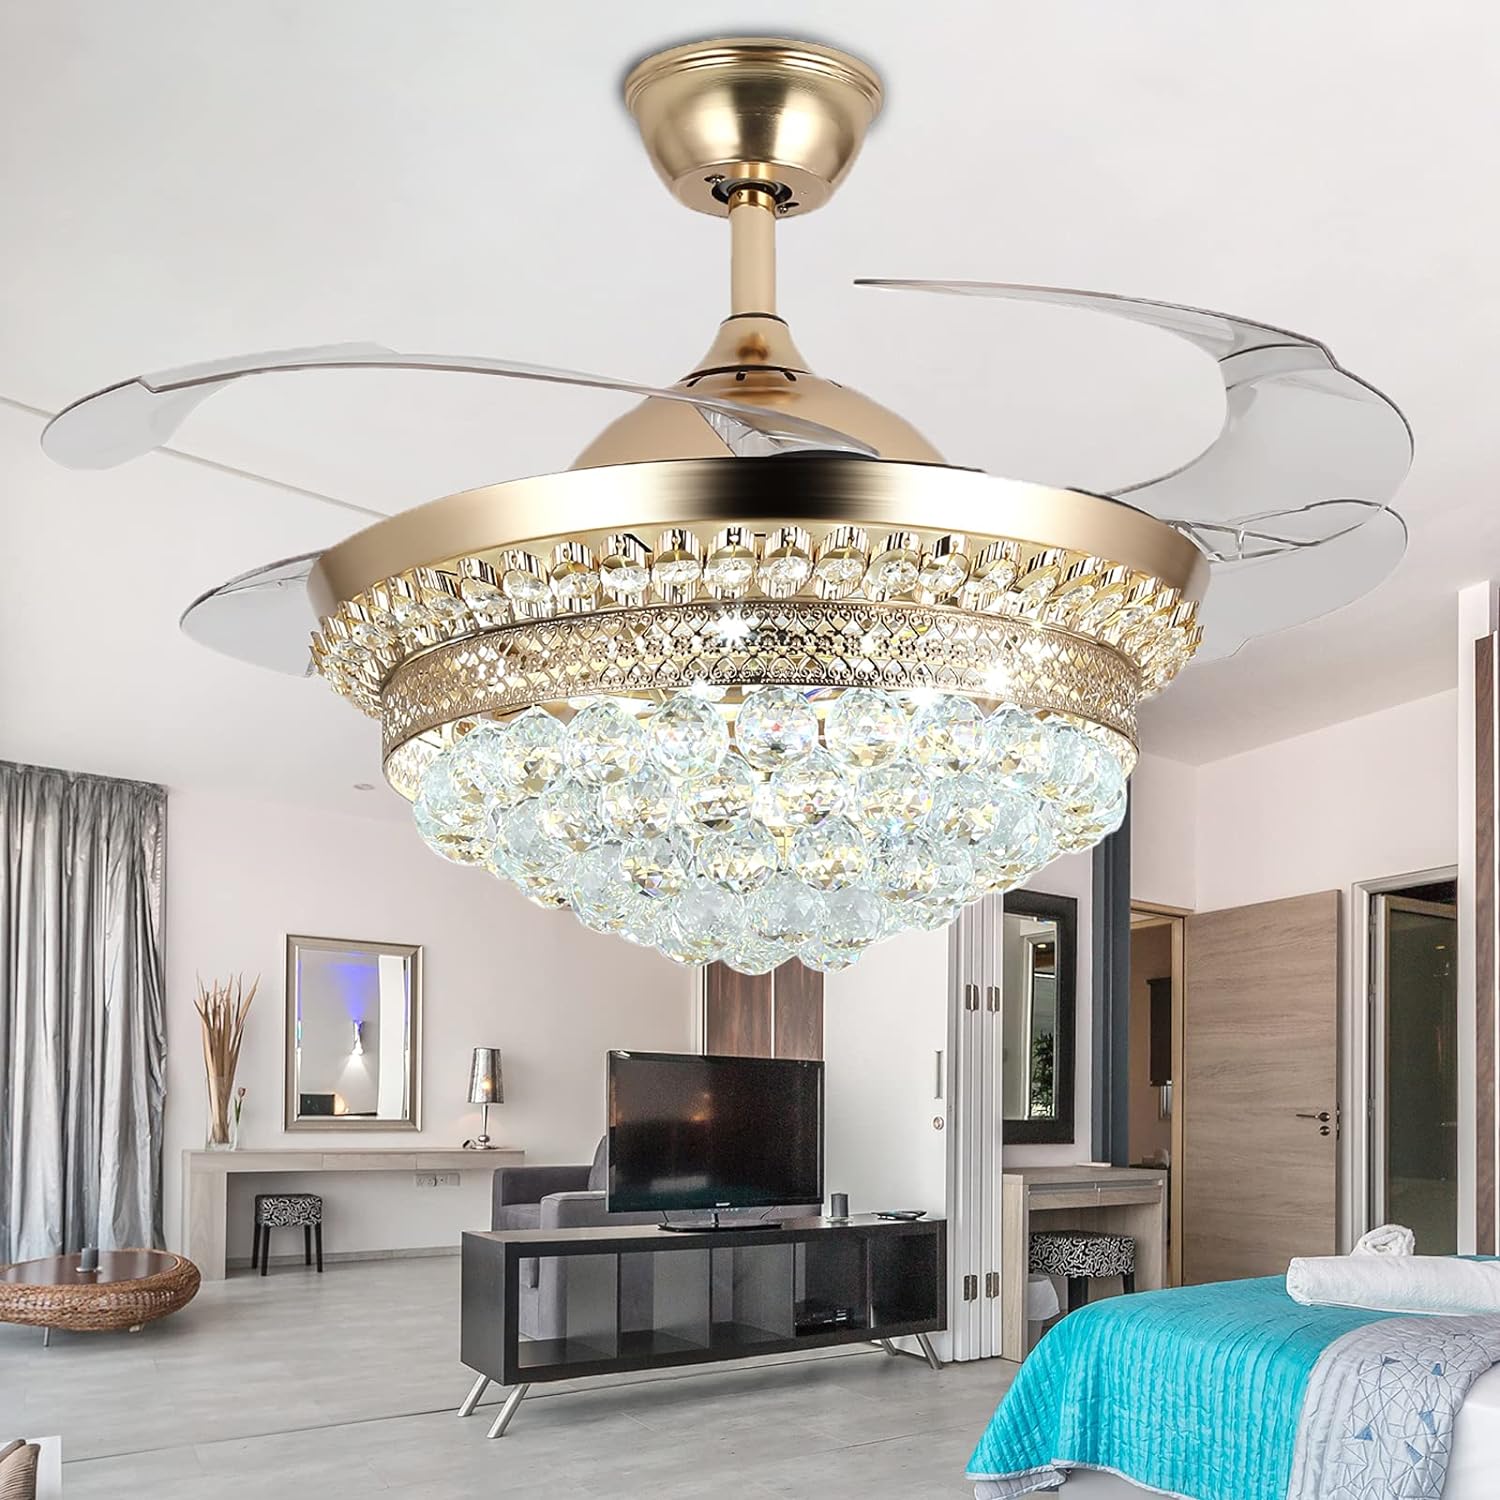 42" Luxury K9 Crystal LED Chandeliers Remote Retractable Ceiling Fans Lighting 